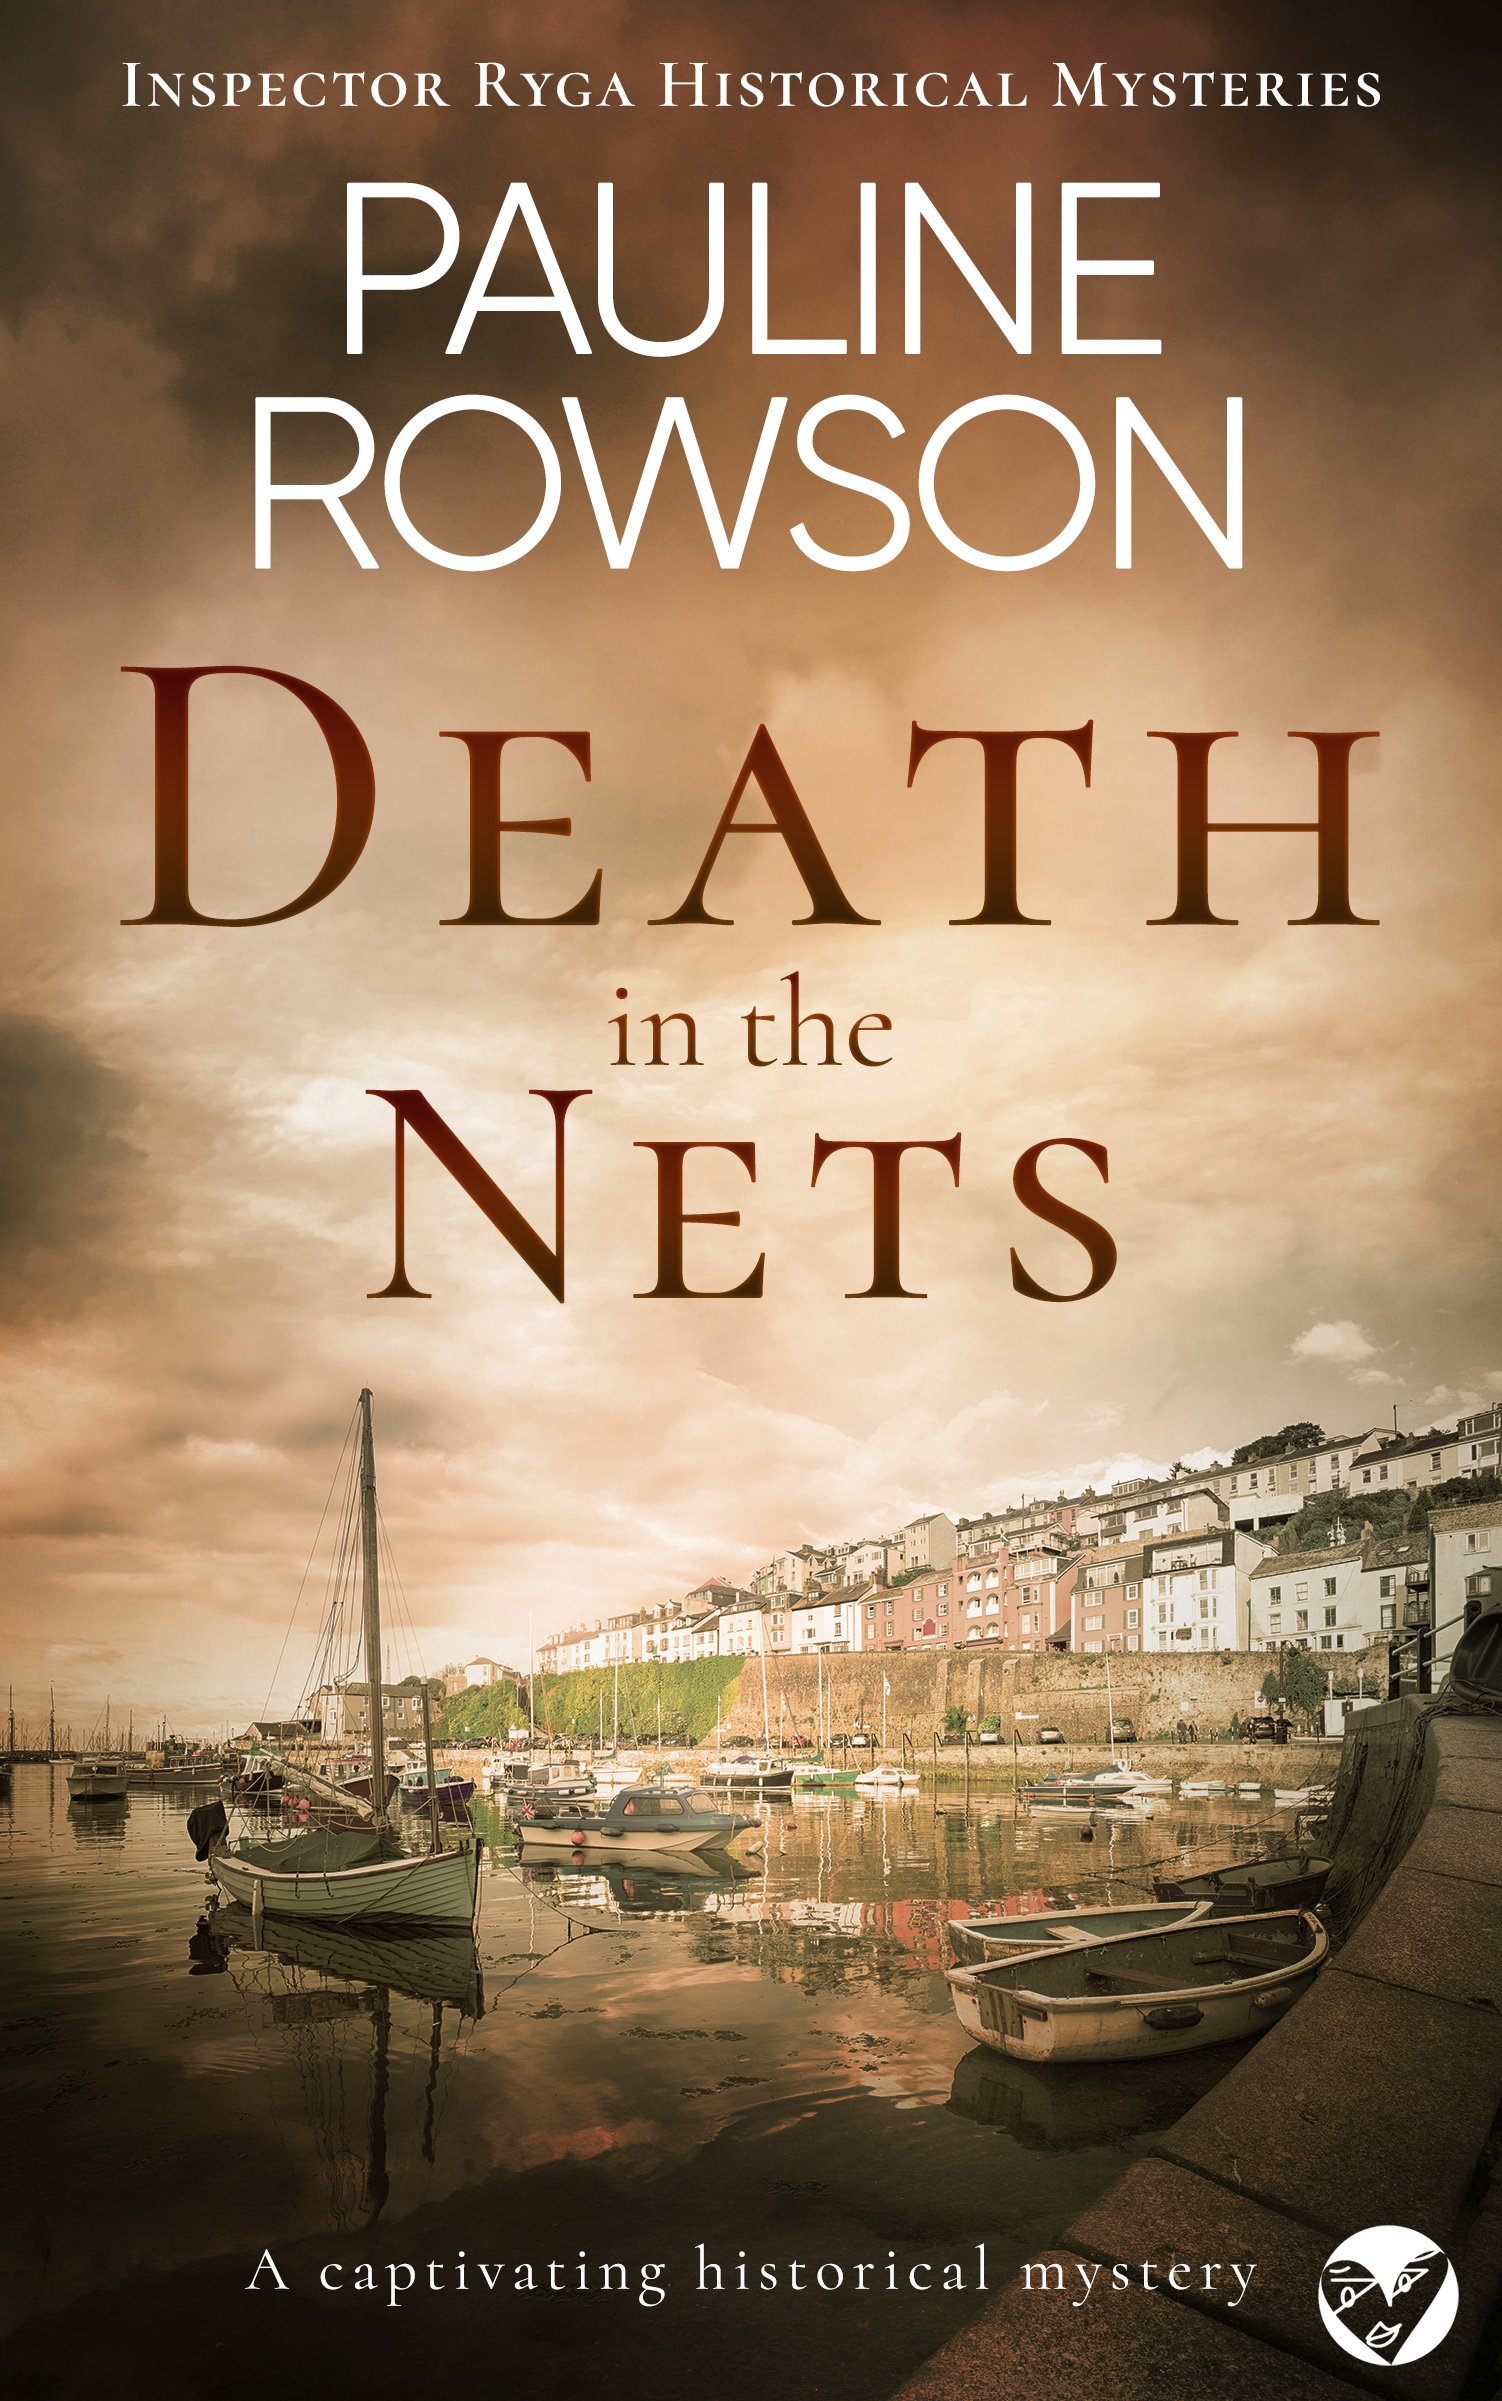 DEATH IN THE NETS Cover publish.jpg